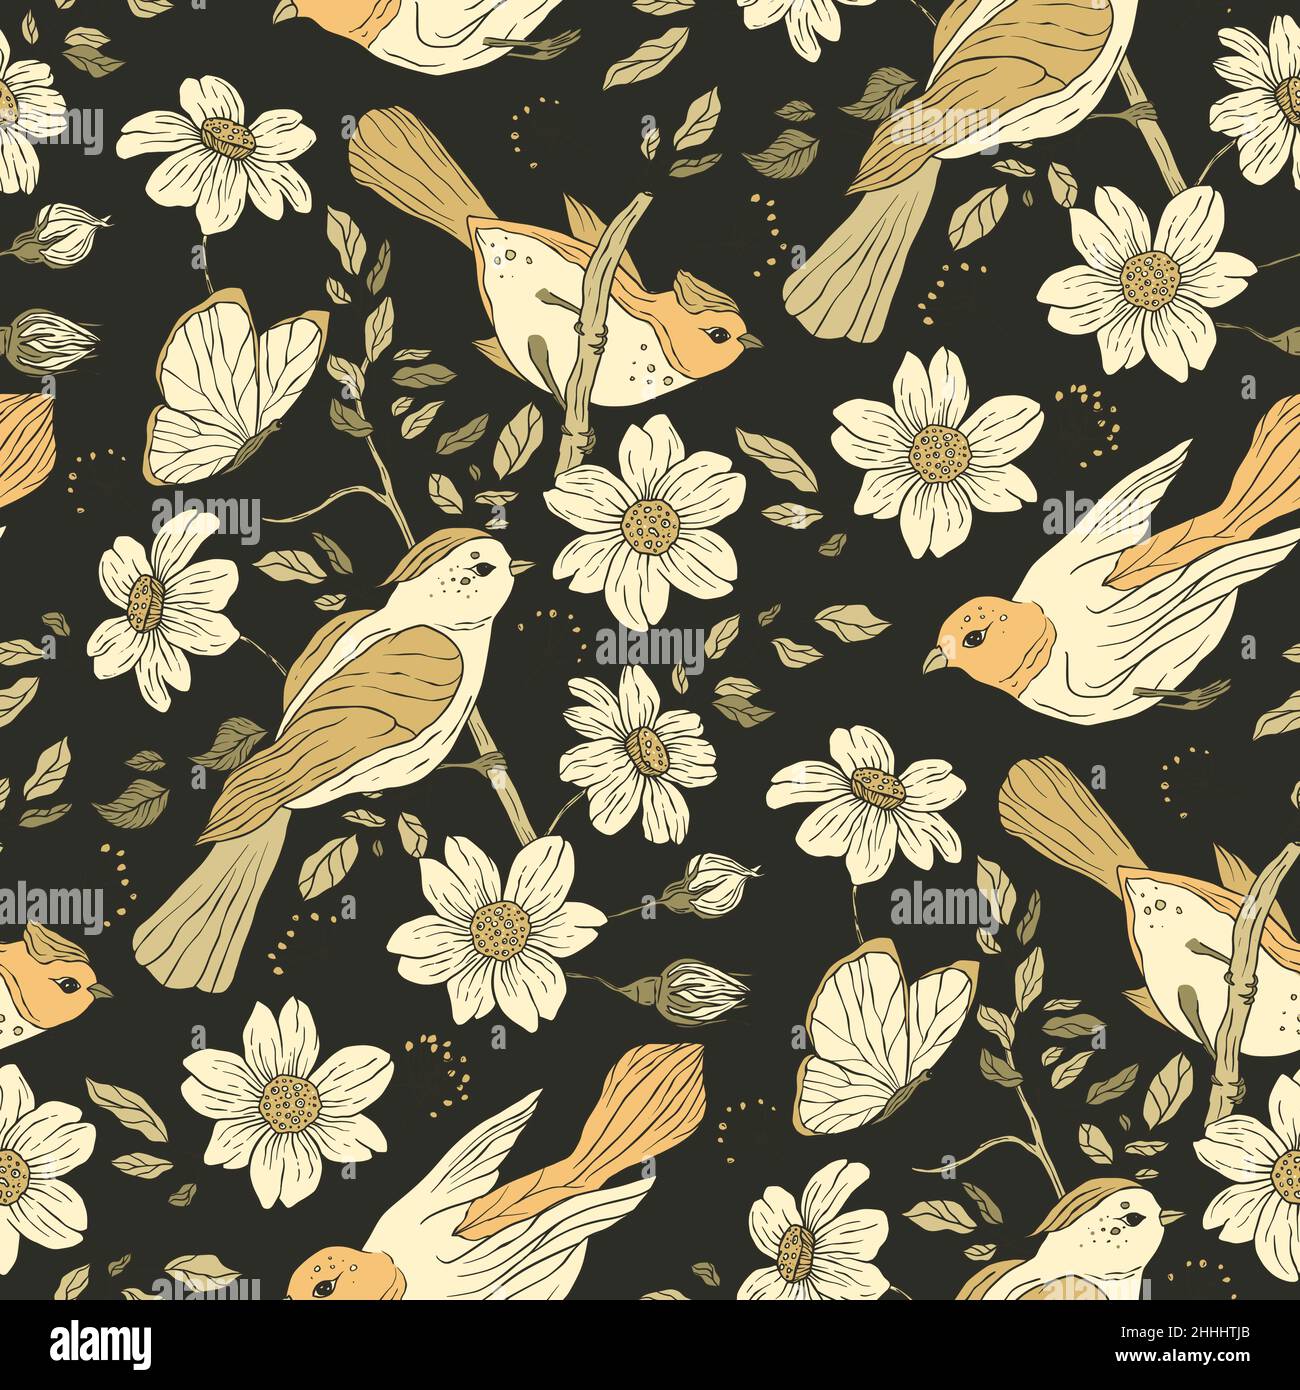 Vintage bird and butterfly boho floral seamless pattern with daisy flower Stock Vector